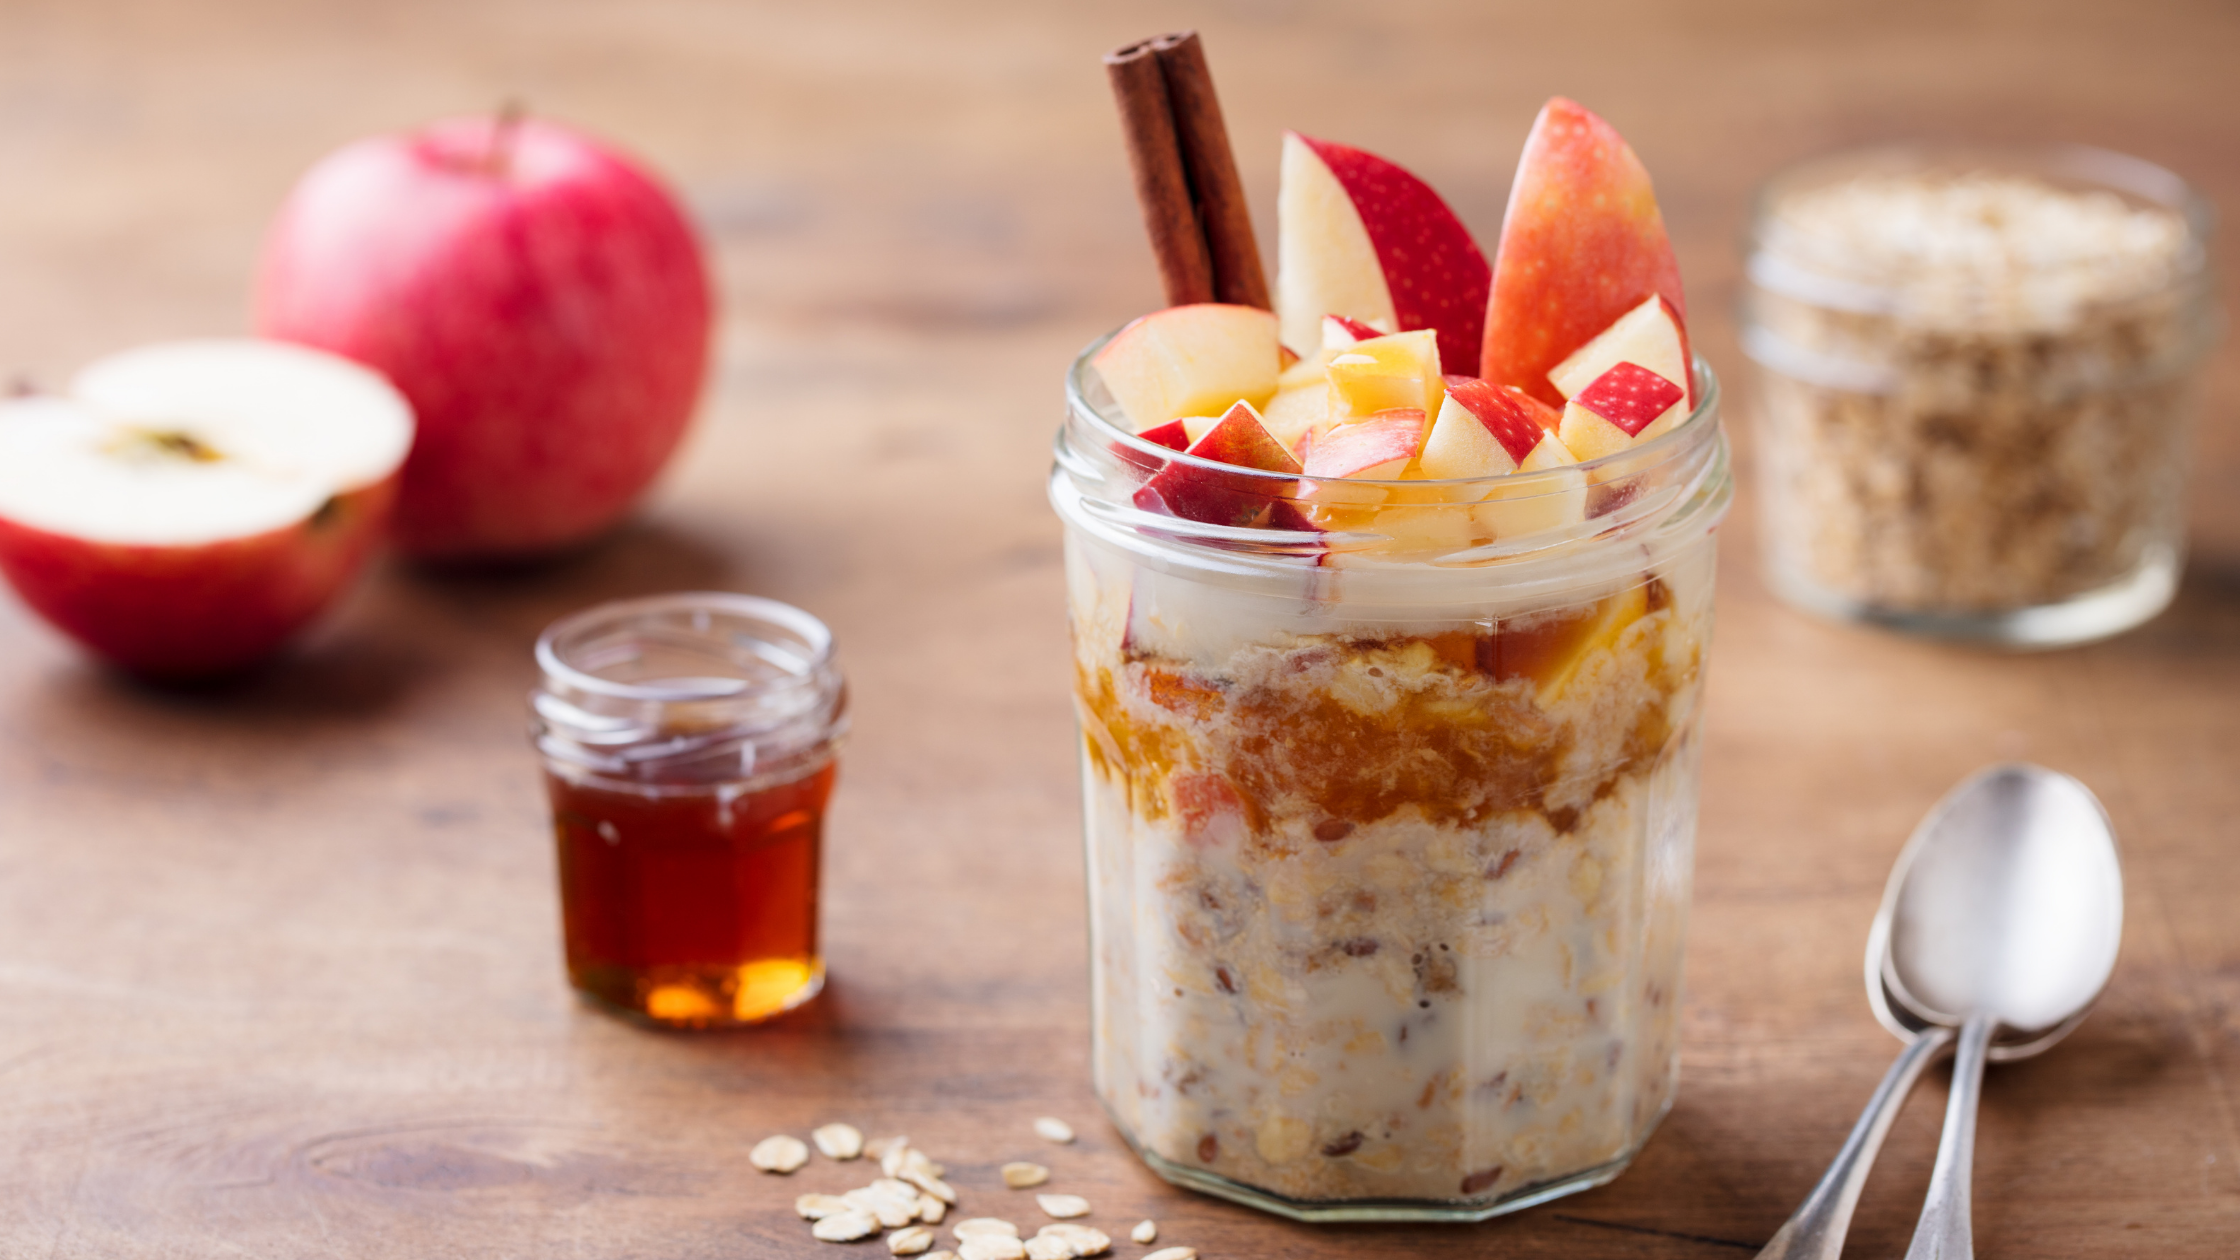 How To Make Delicious Apple Cinnamon Overnight Oats